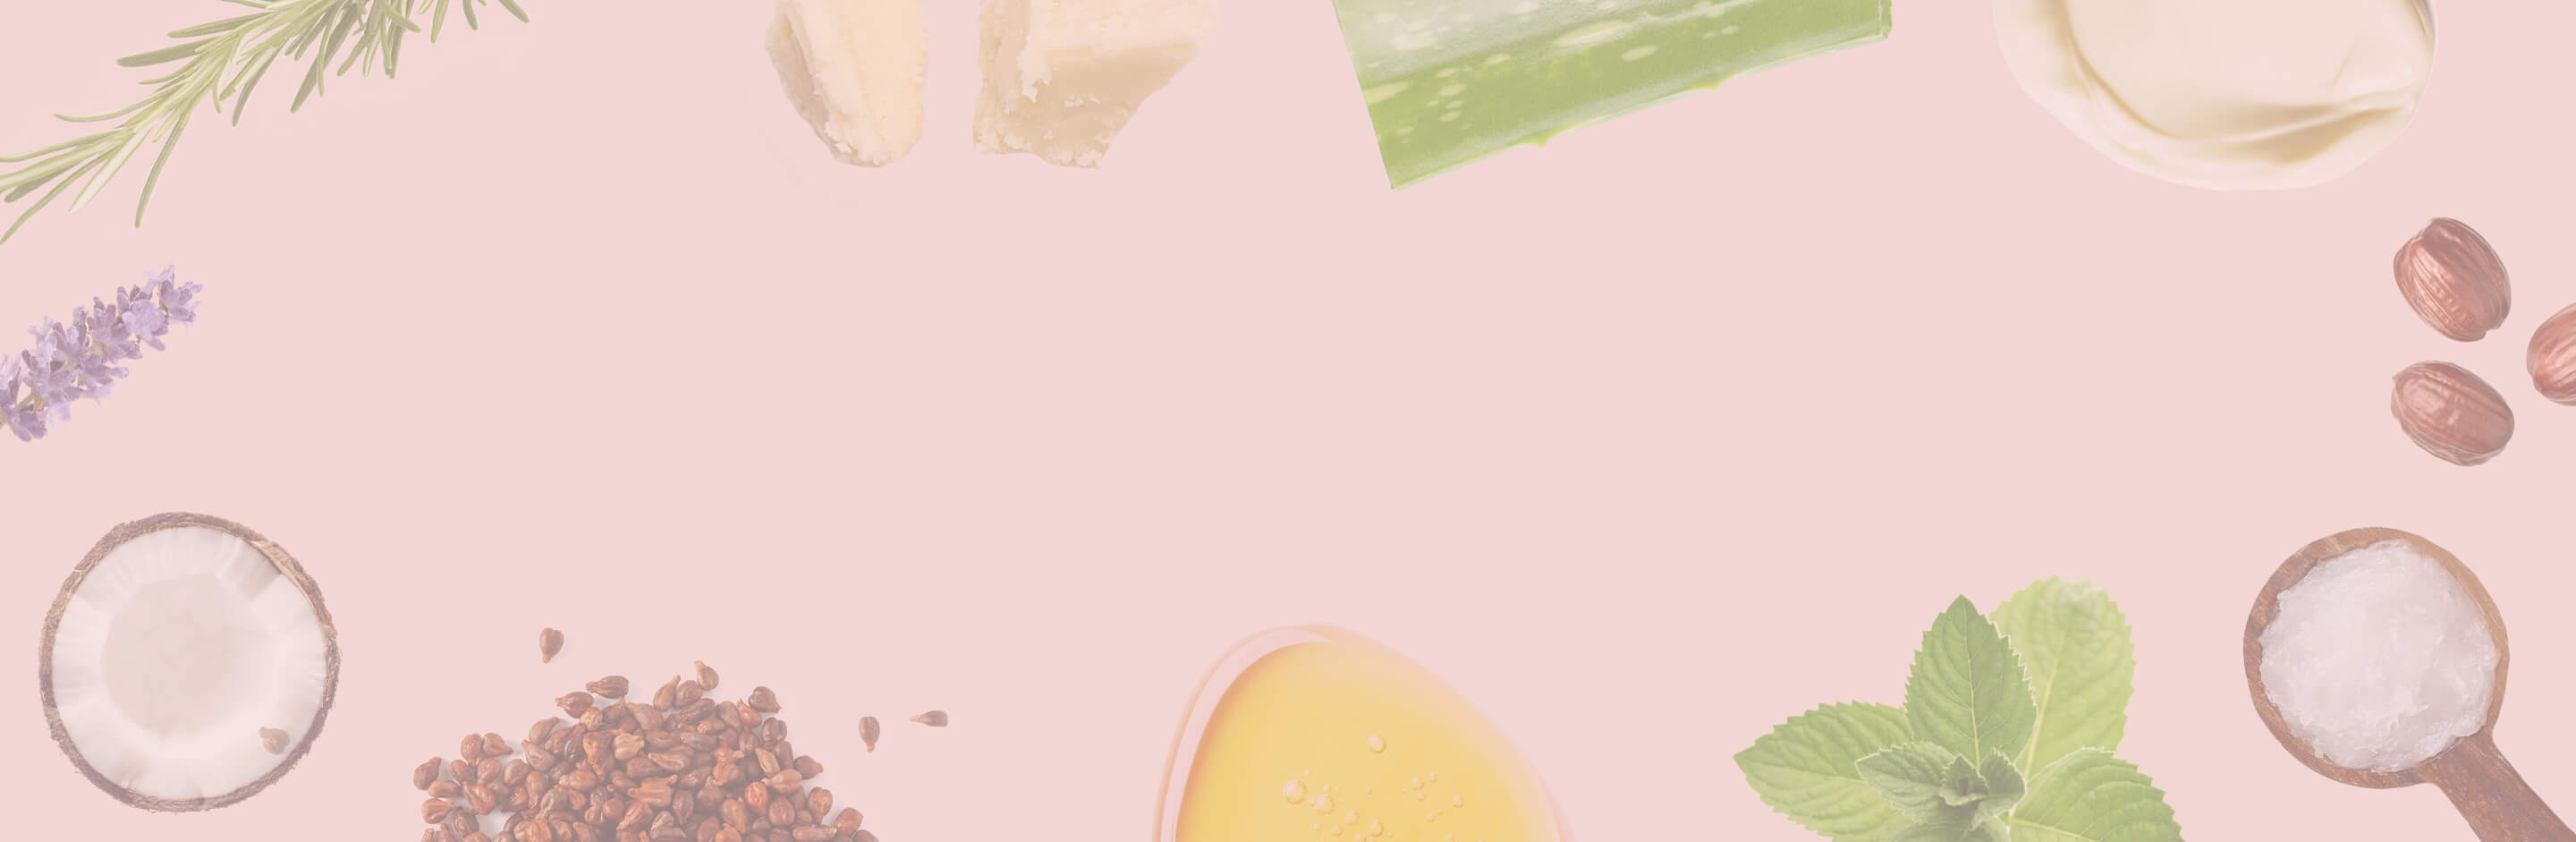 Pale pink background with images of natural ingredients like coconut, aloe and jojoba